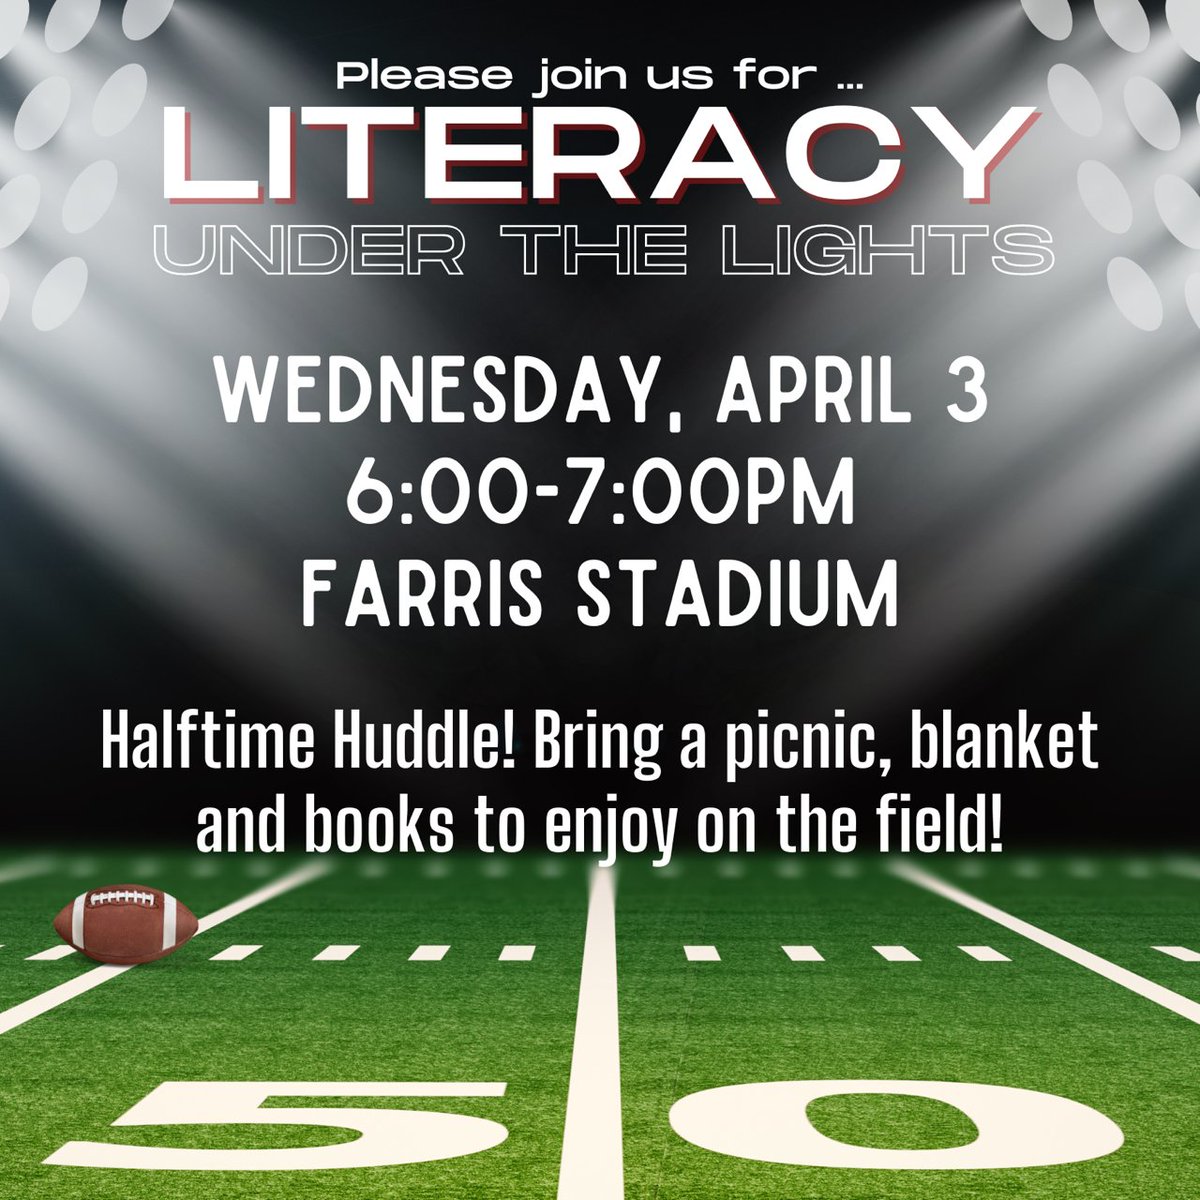 Mark your calendars for the upcoming literacy event taking place at Farris Stadium on April 3rd!! Grab a blanket, your family or friends, and some books and head on over! Door prizes to be raffled off! #TeamNorthside #Literacy #HalftimeHuddle #RootEd @geriberger08